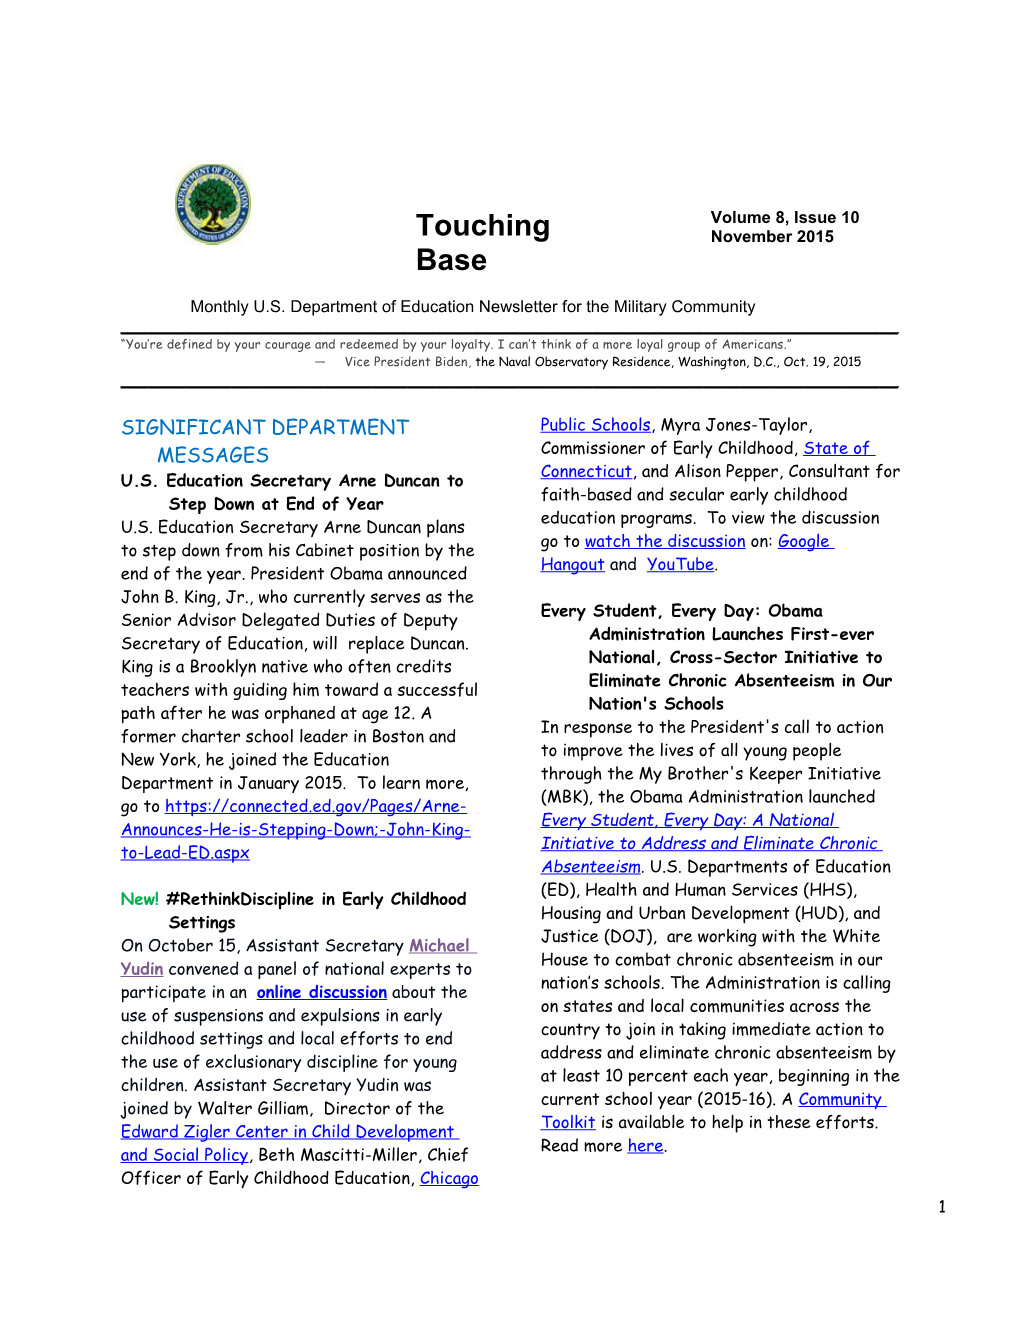 Touching Base, Volume 8, Issue 10 - November 2015 (MS Word)